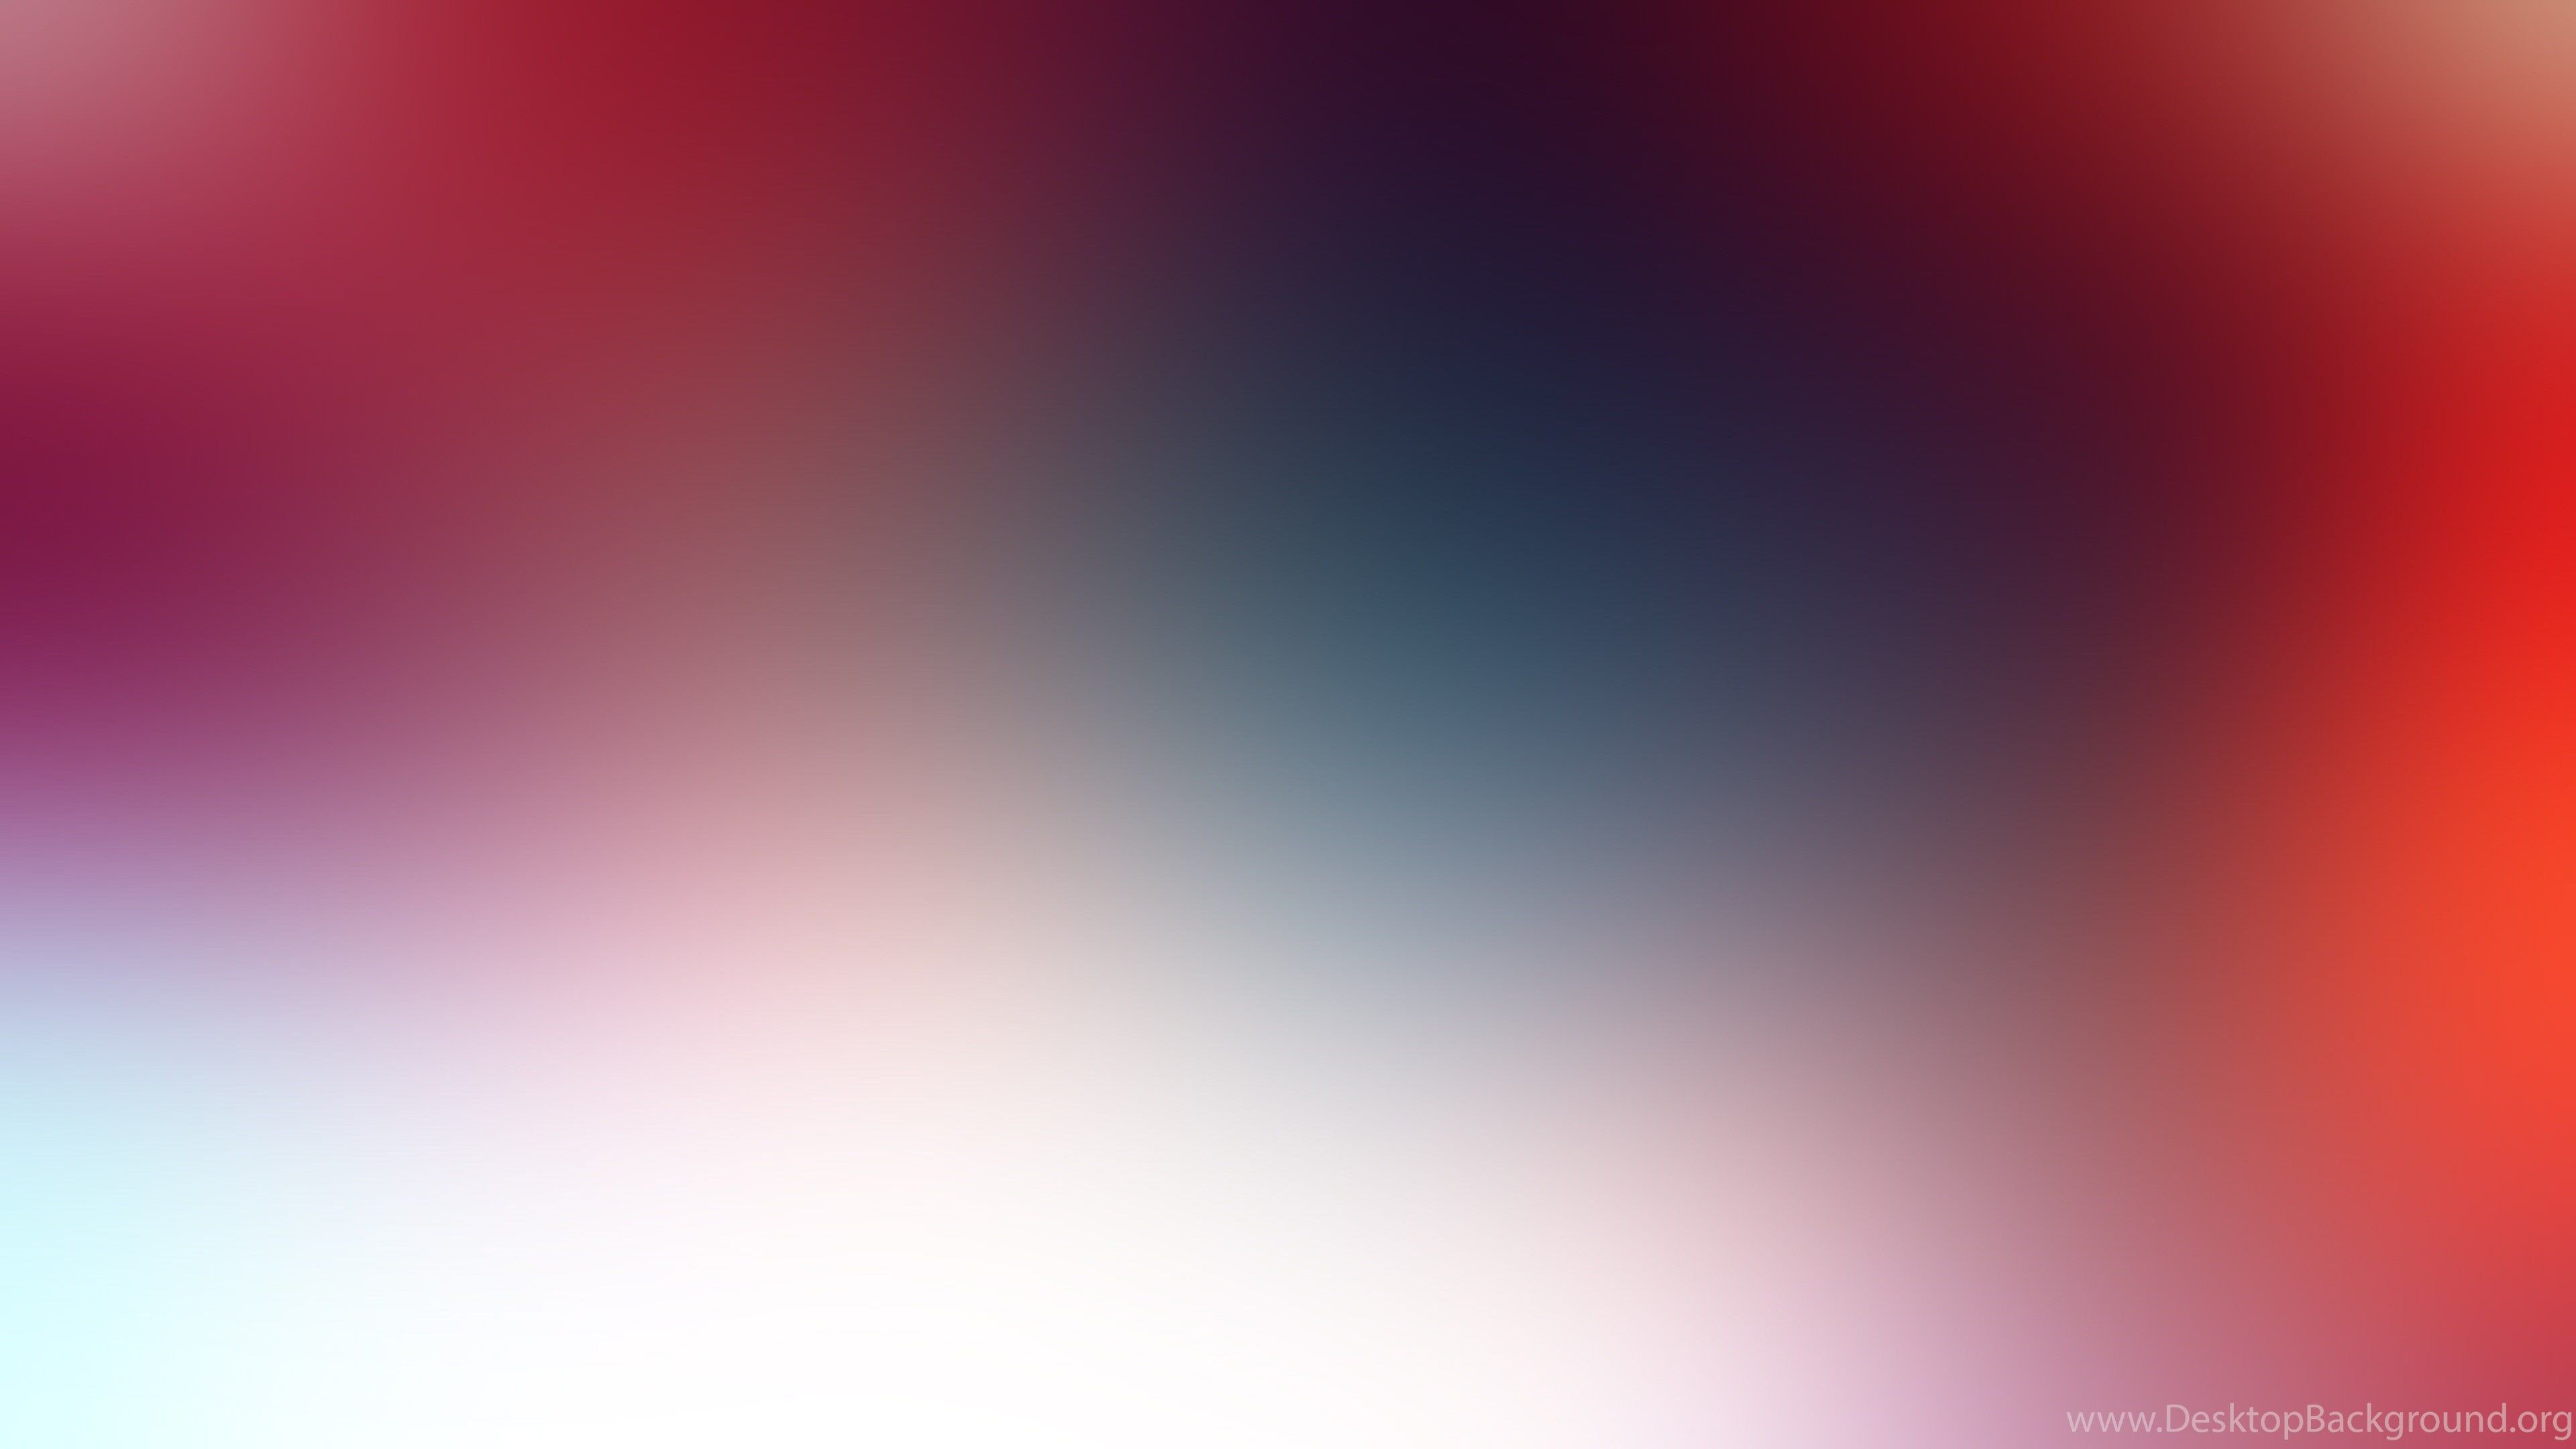 Red White And Blue Abstract Wallpaper Desktop Background